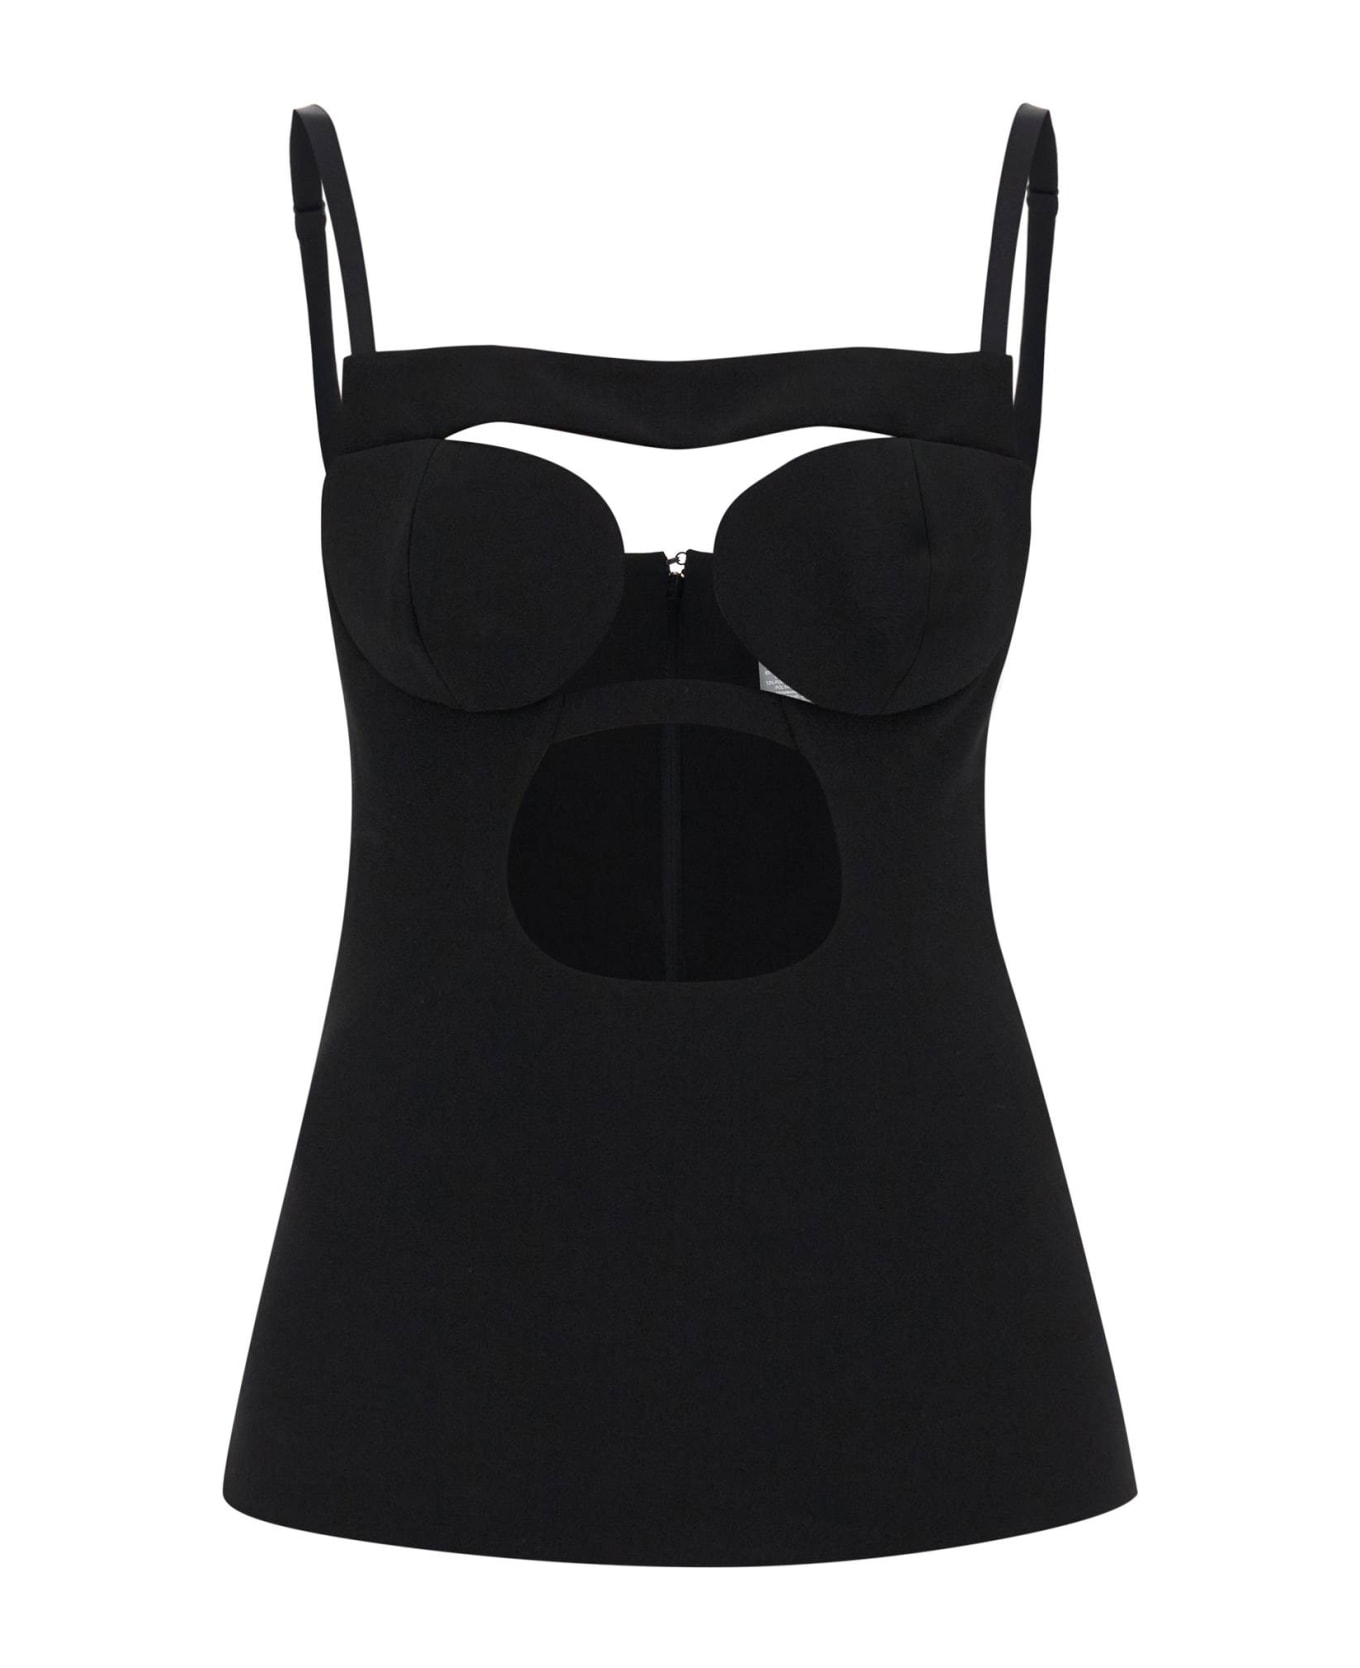 Nensi Dojaka Cut-out Top With Padded Cup - BLACK (Black)